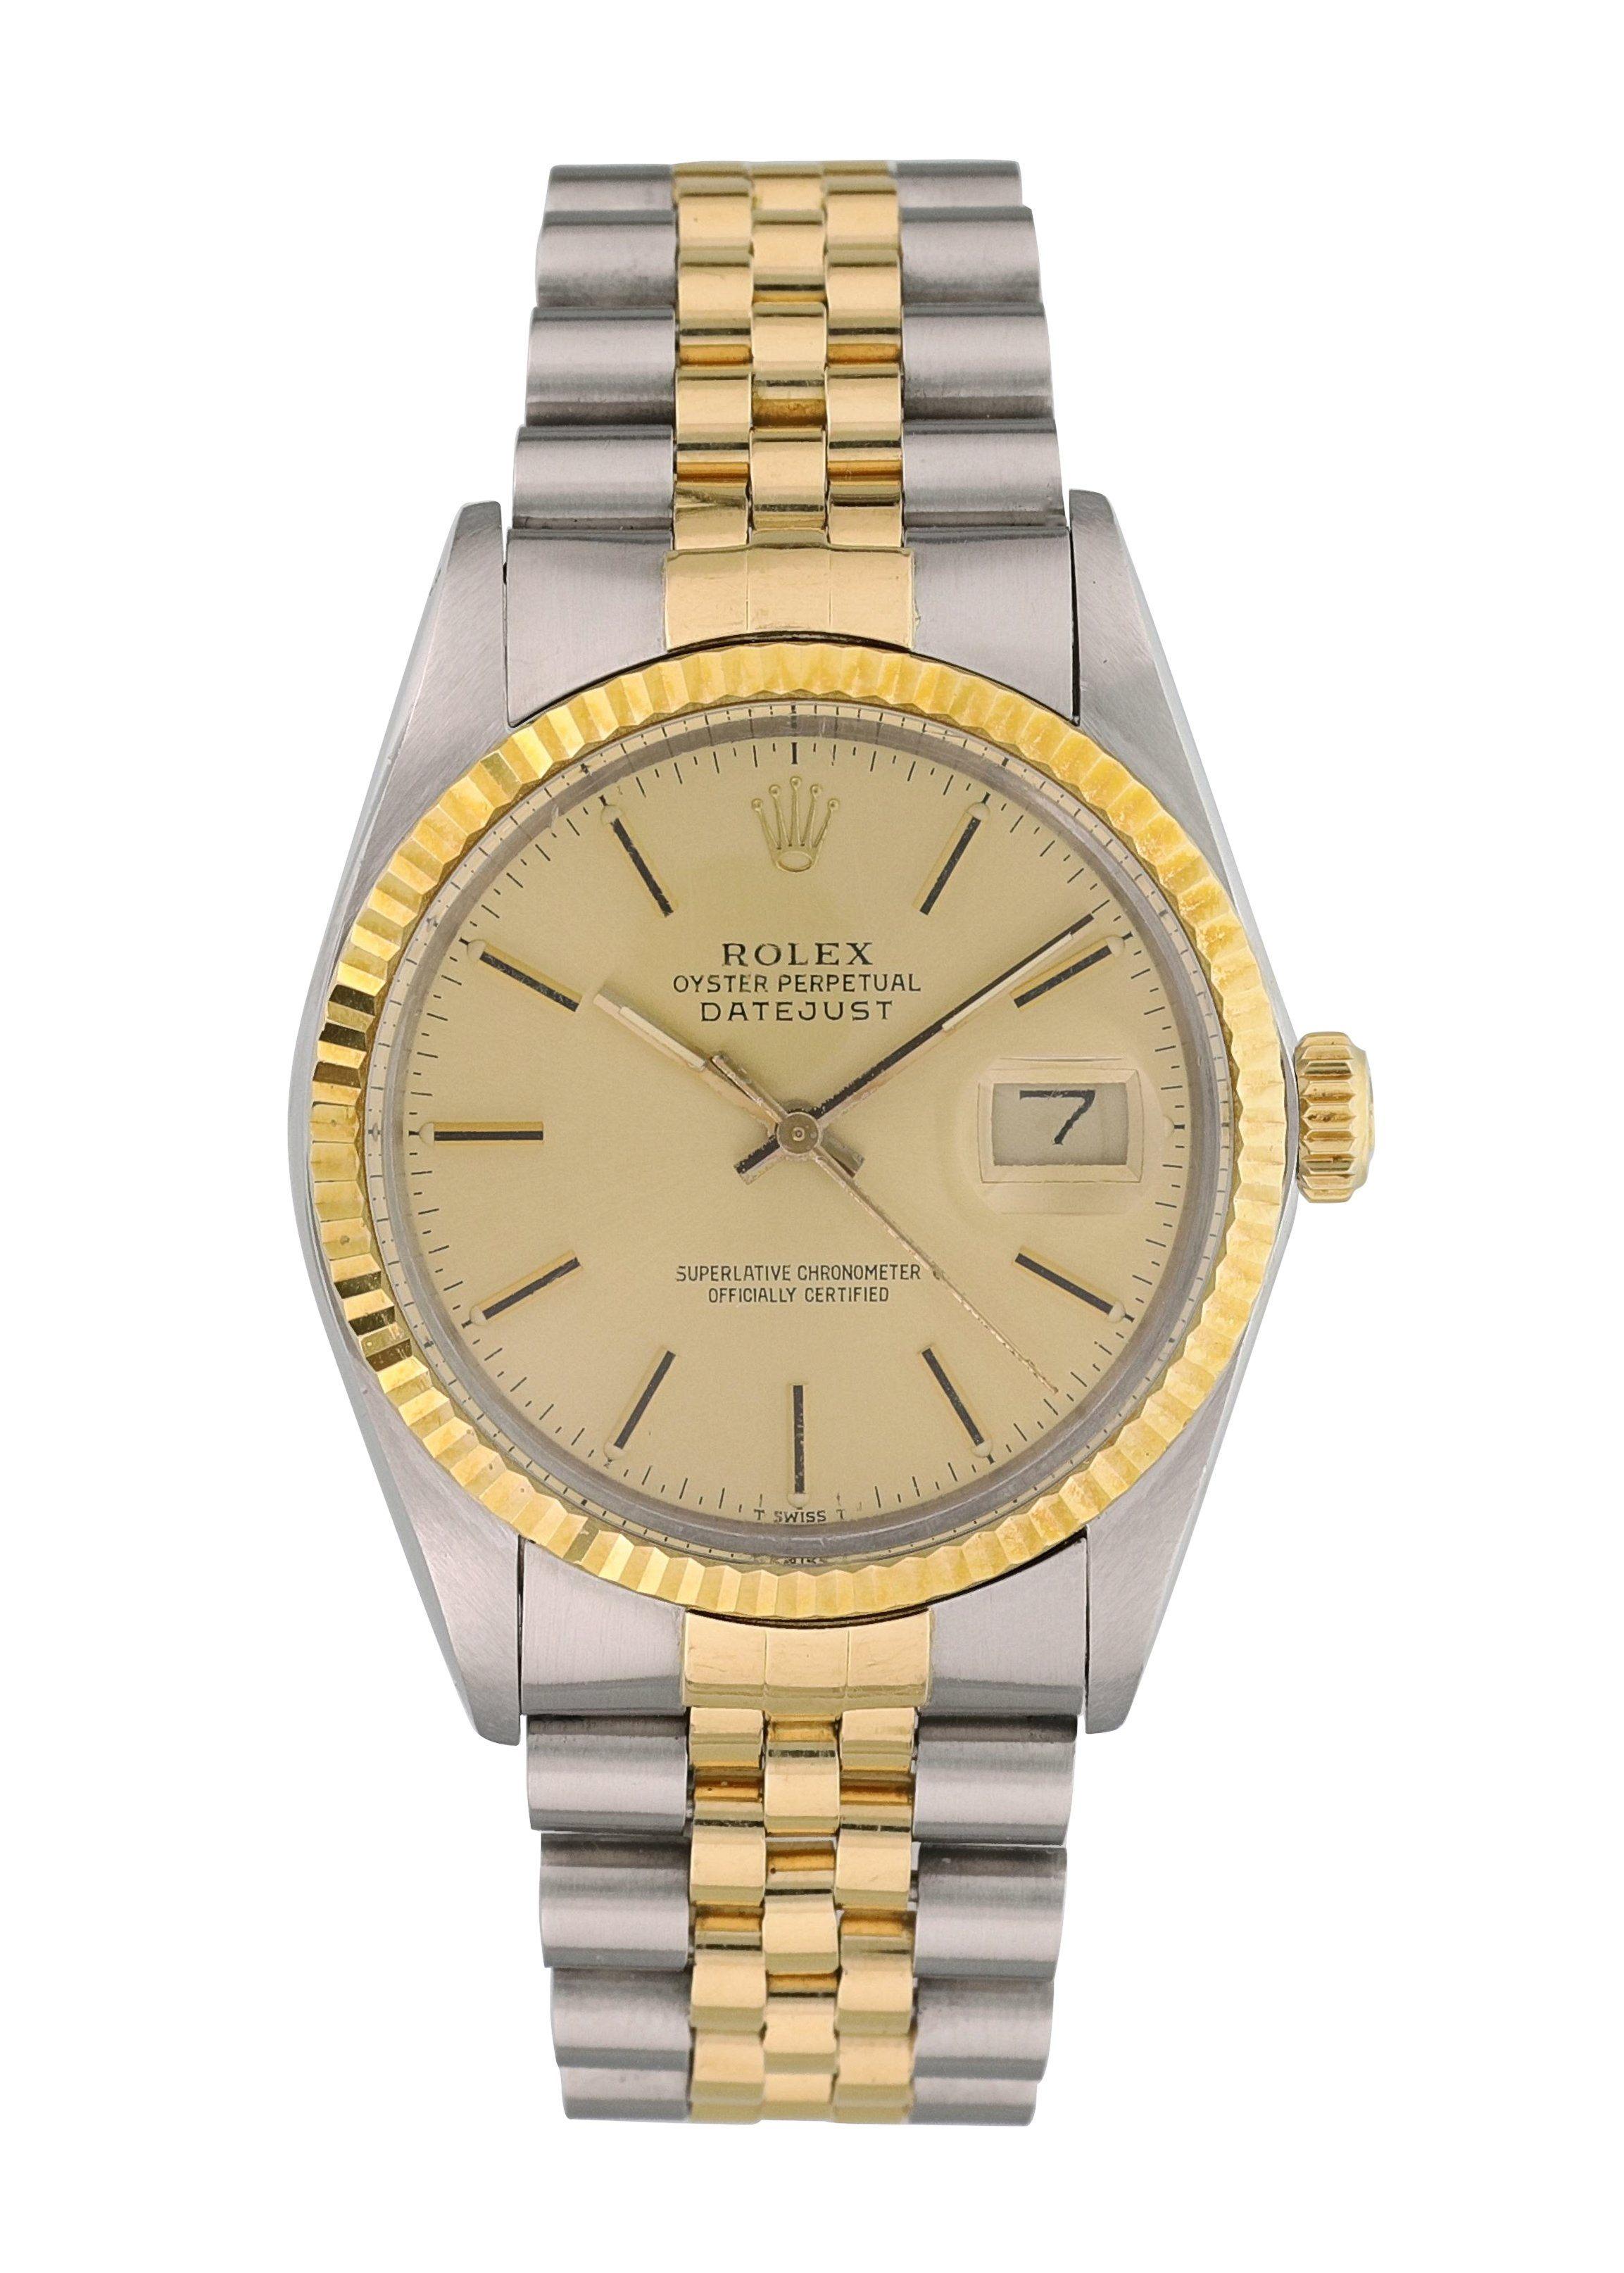 Rolex Datejust 16013 Mens Watch.
36mm Stainless Steel case. 
Yellow Gold Stationary bezel. 
Champagne dial with luminous gold hands and index hour markers. 
Minute markers on the outer dial. 
Date display at the 3 o'clock position. 
Stainless Steel